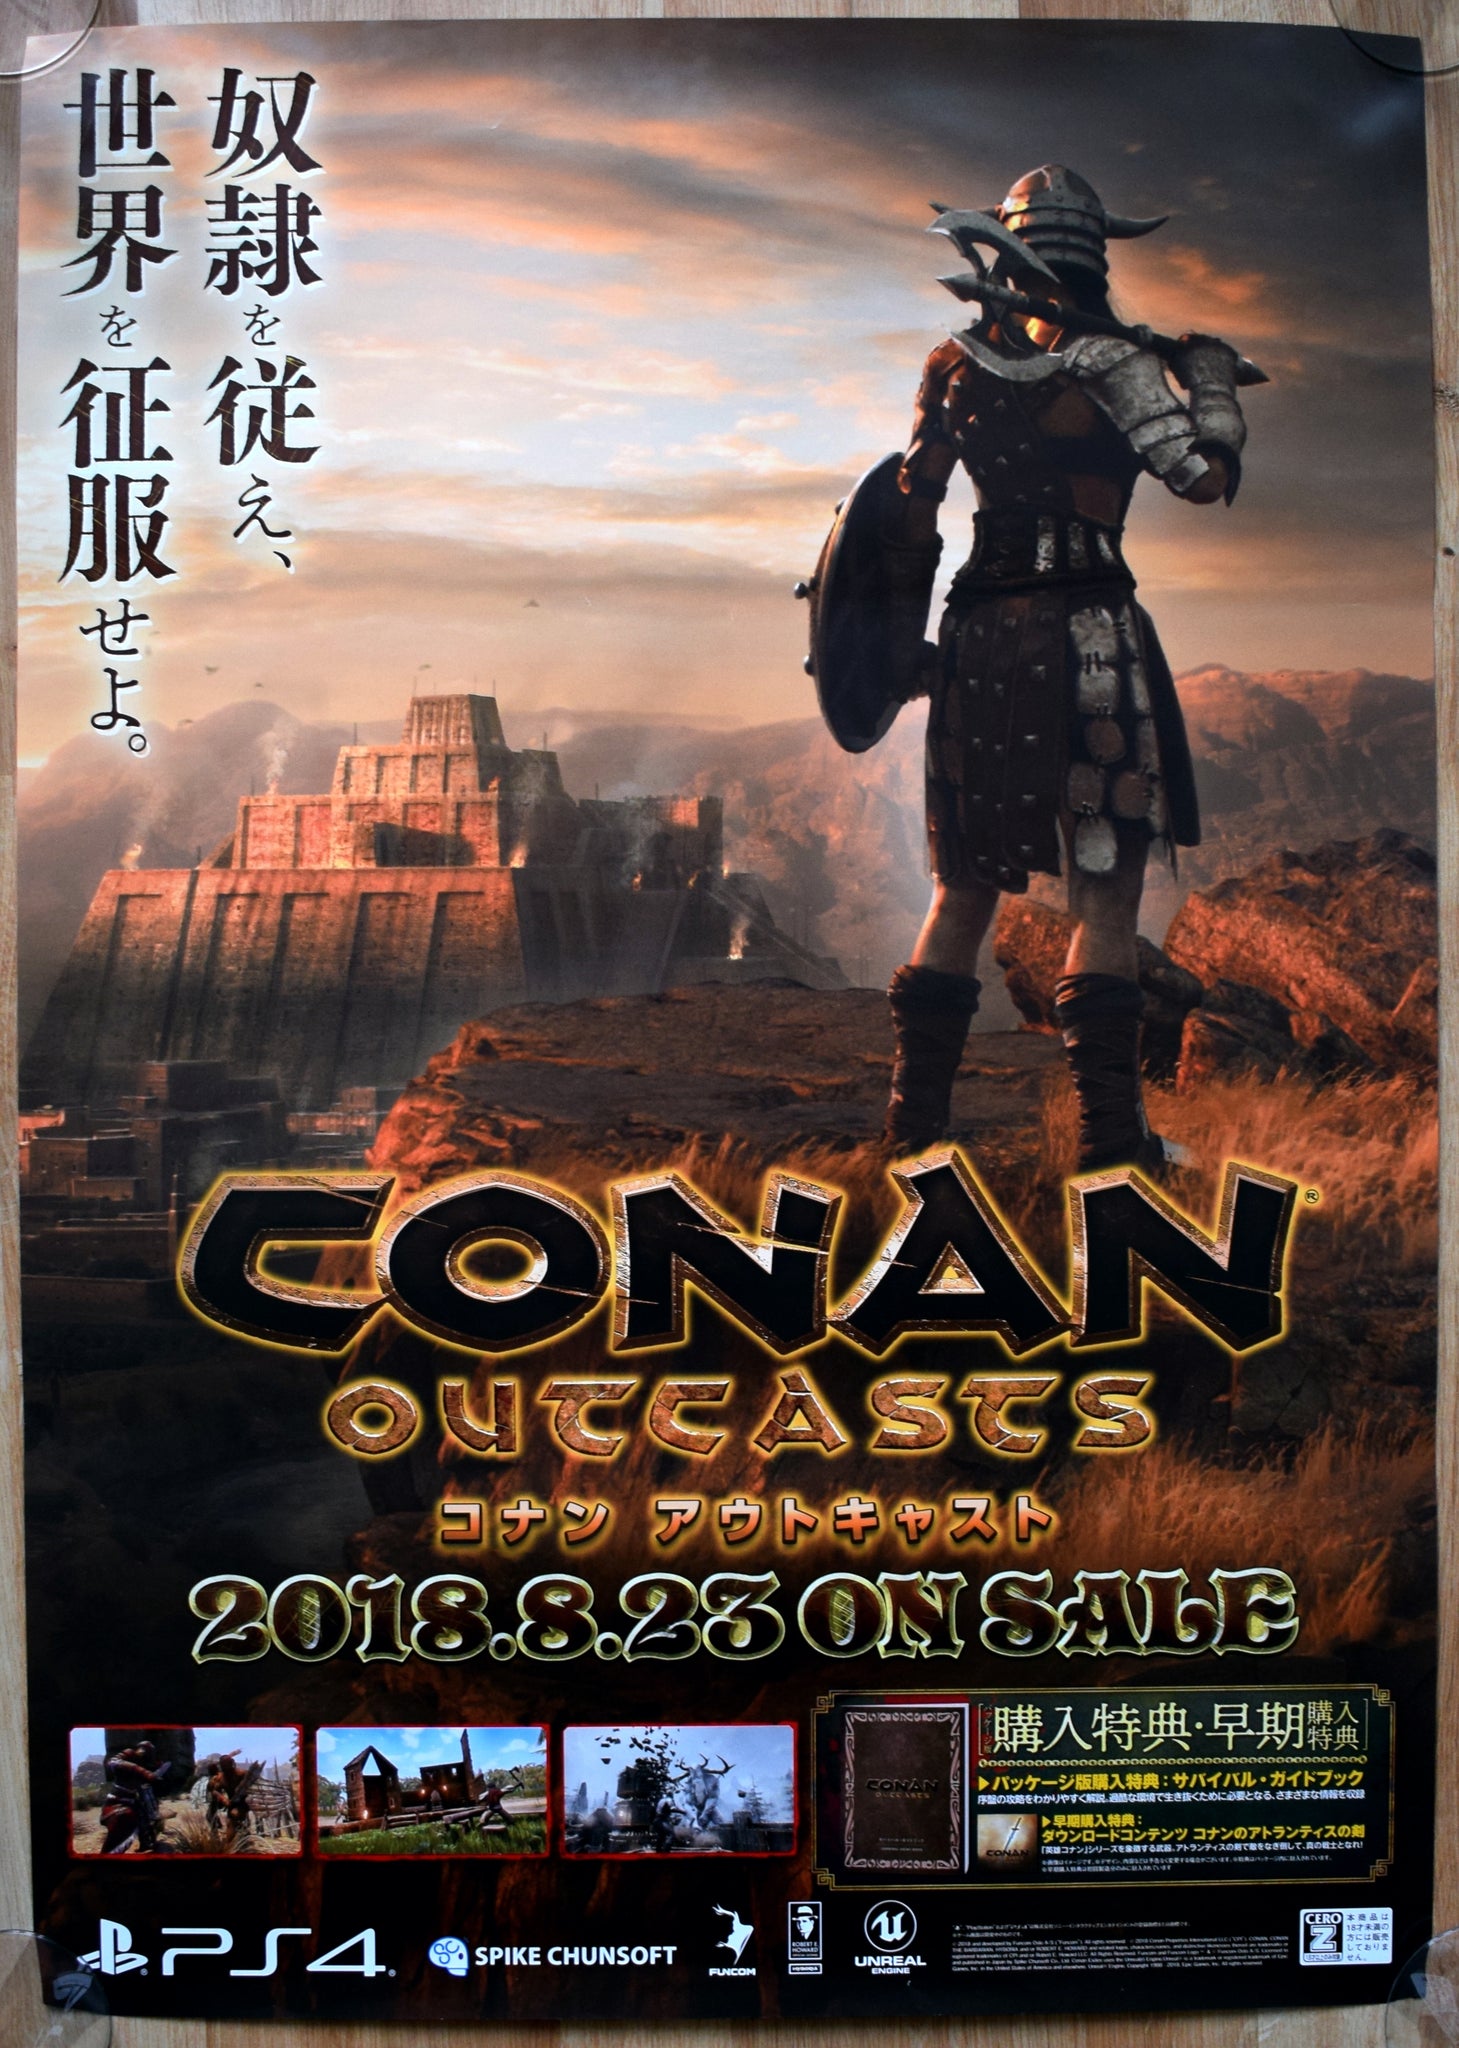 Conan Outcasts (B2) Japanese Promotional Poster